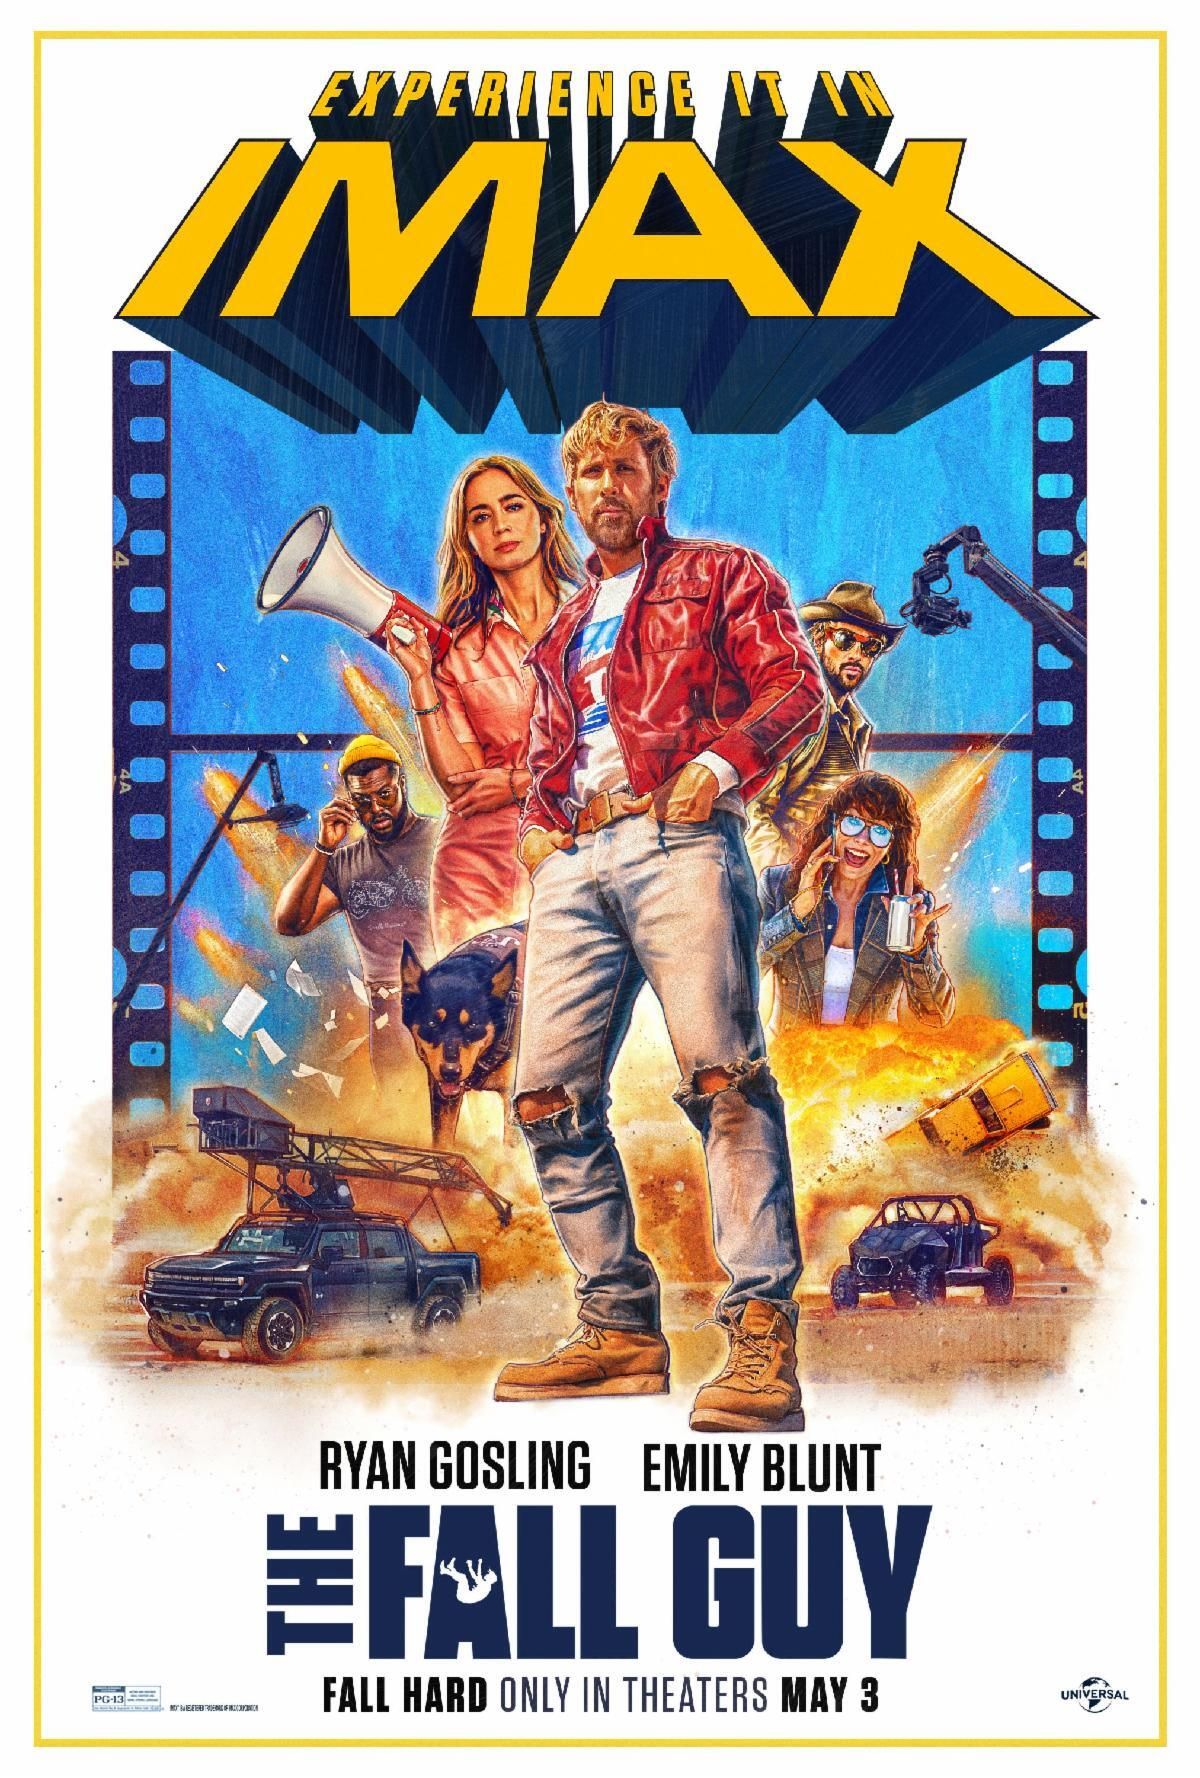 Poster art for The Fall Guy featuring Ryan Gosling and Emily Blunt posing with an explosion behind them